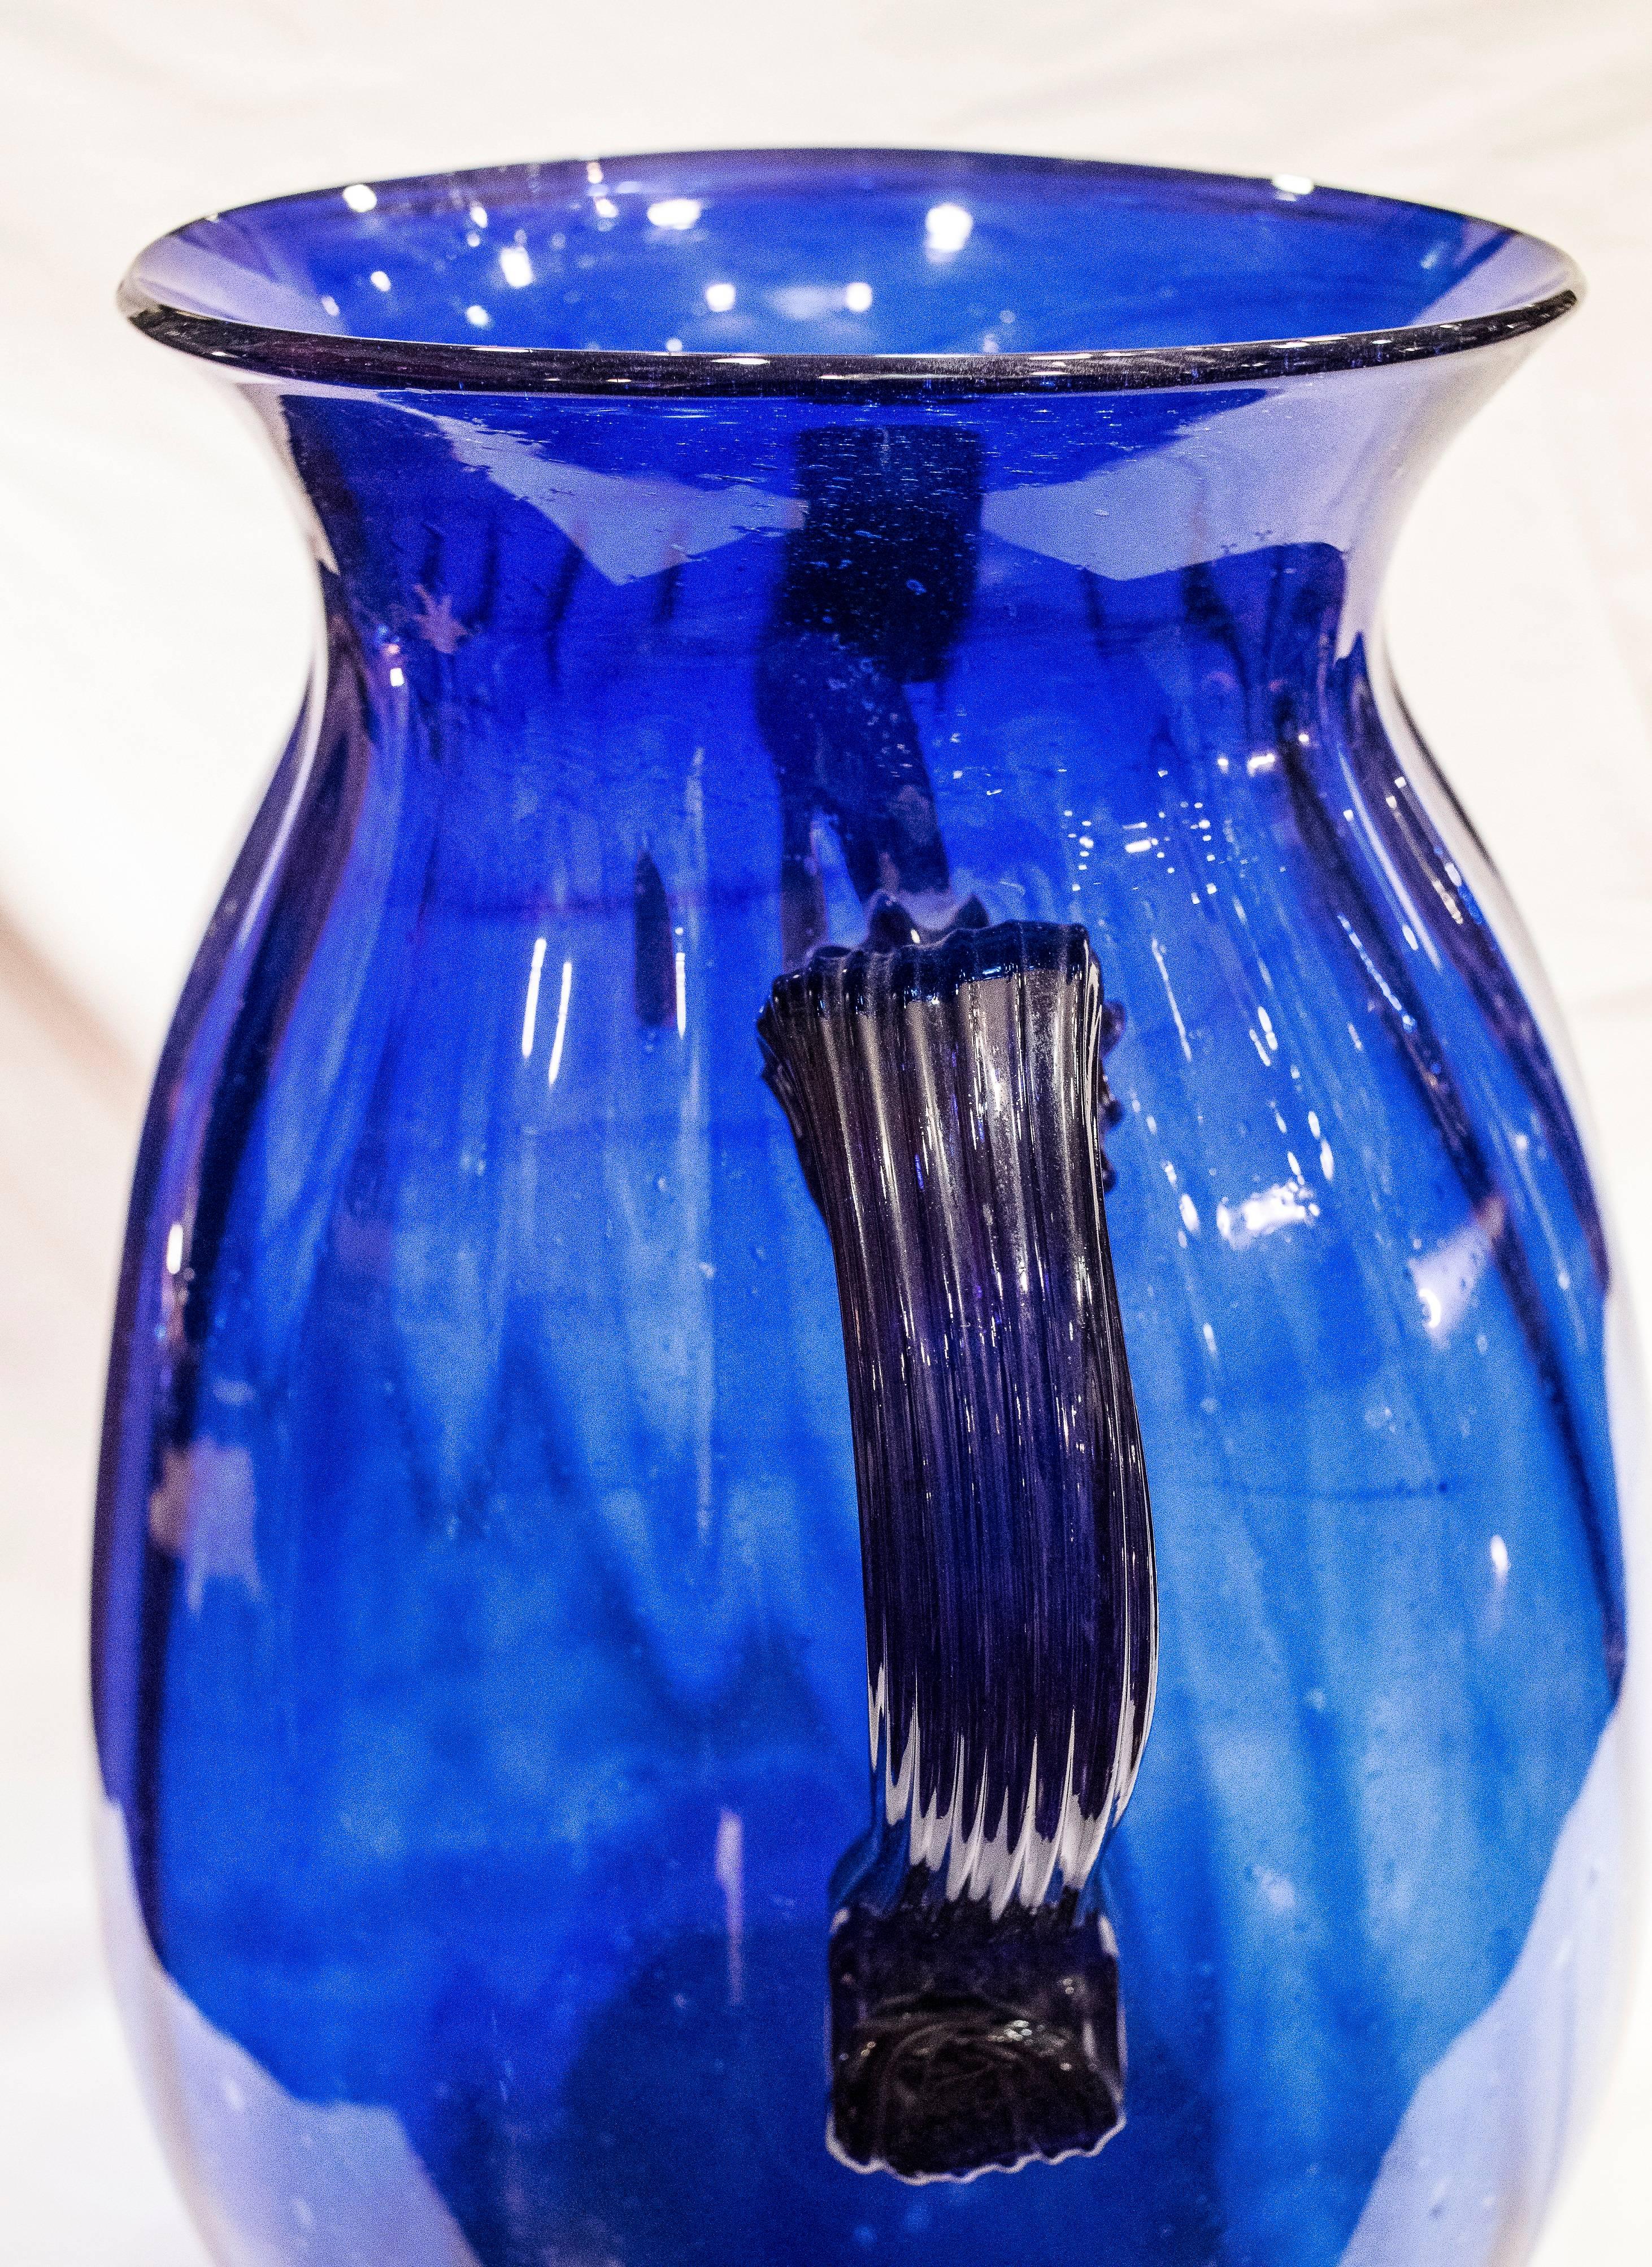 A pair of Murano crystal vases from the 19th century. Blown glass in blue, both are in a very good condition.